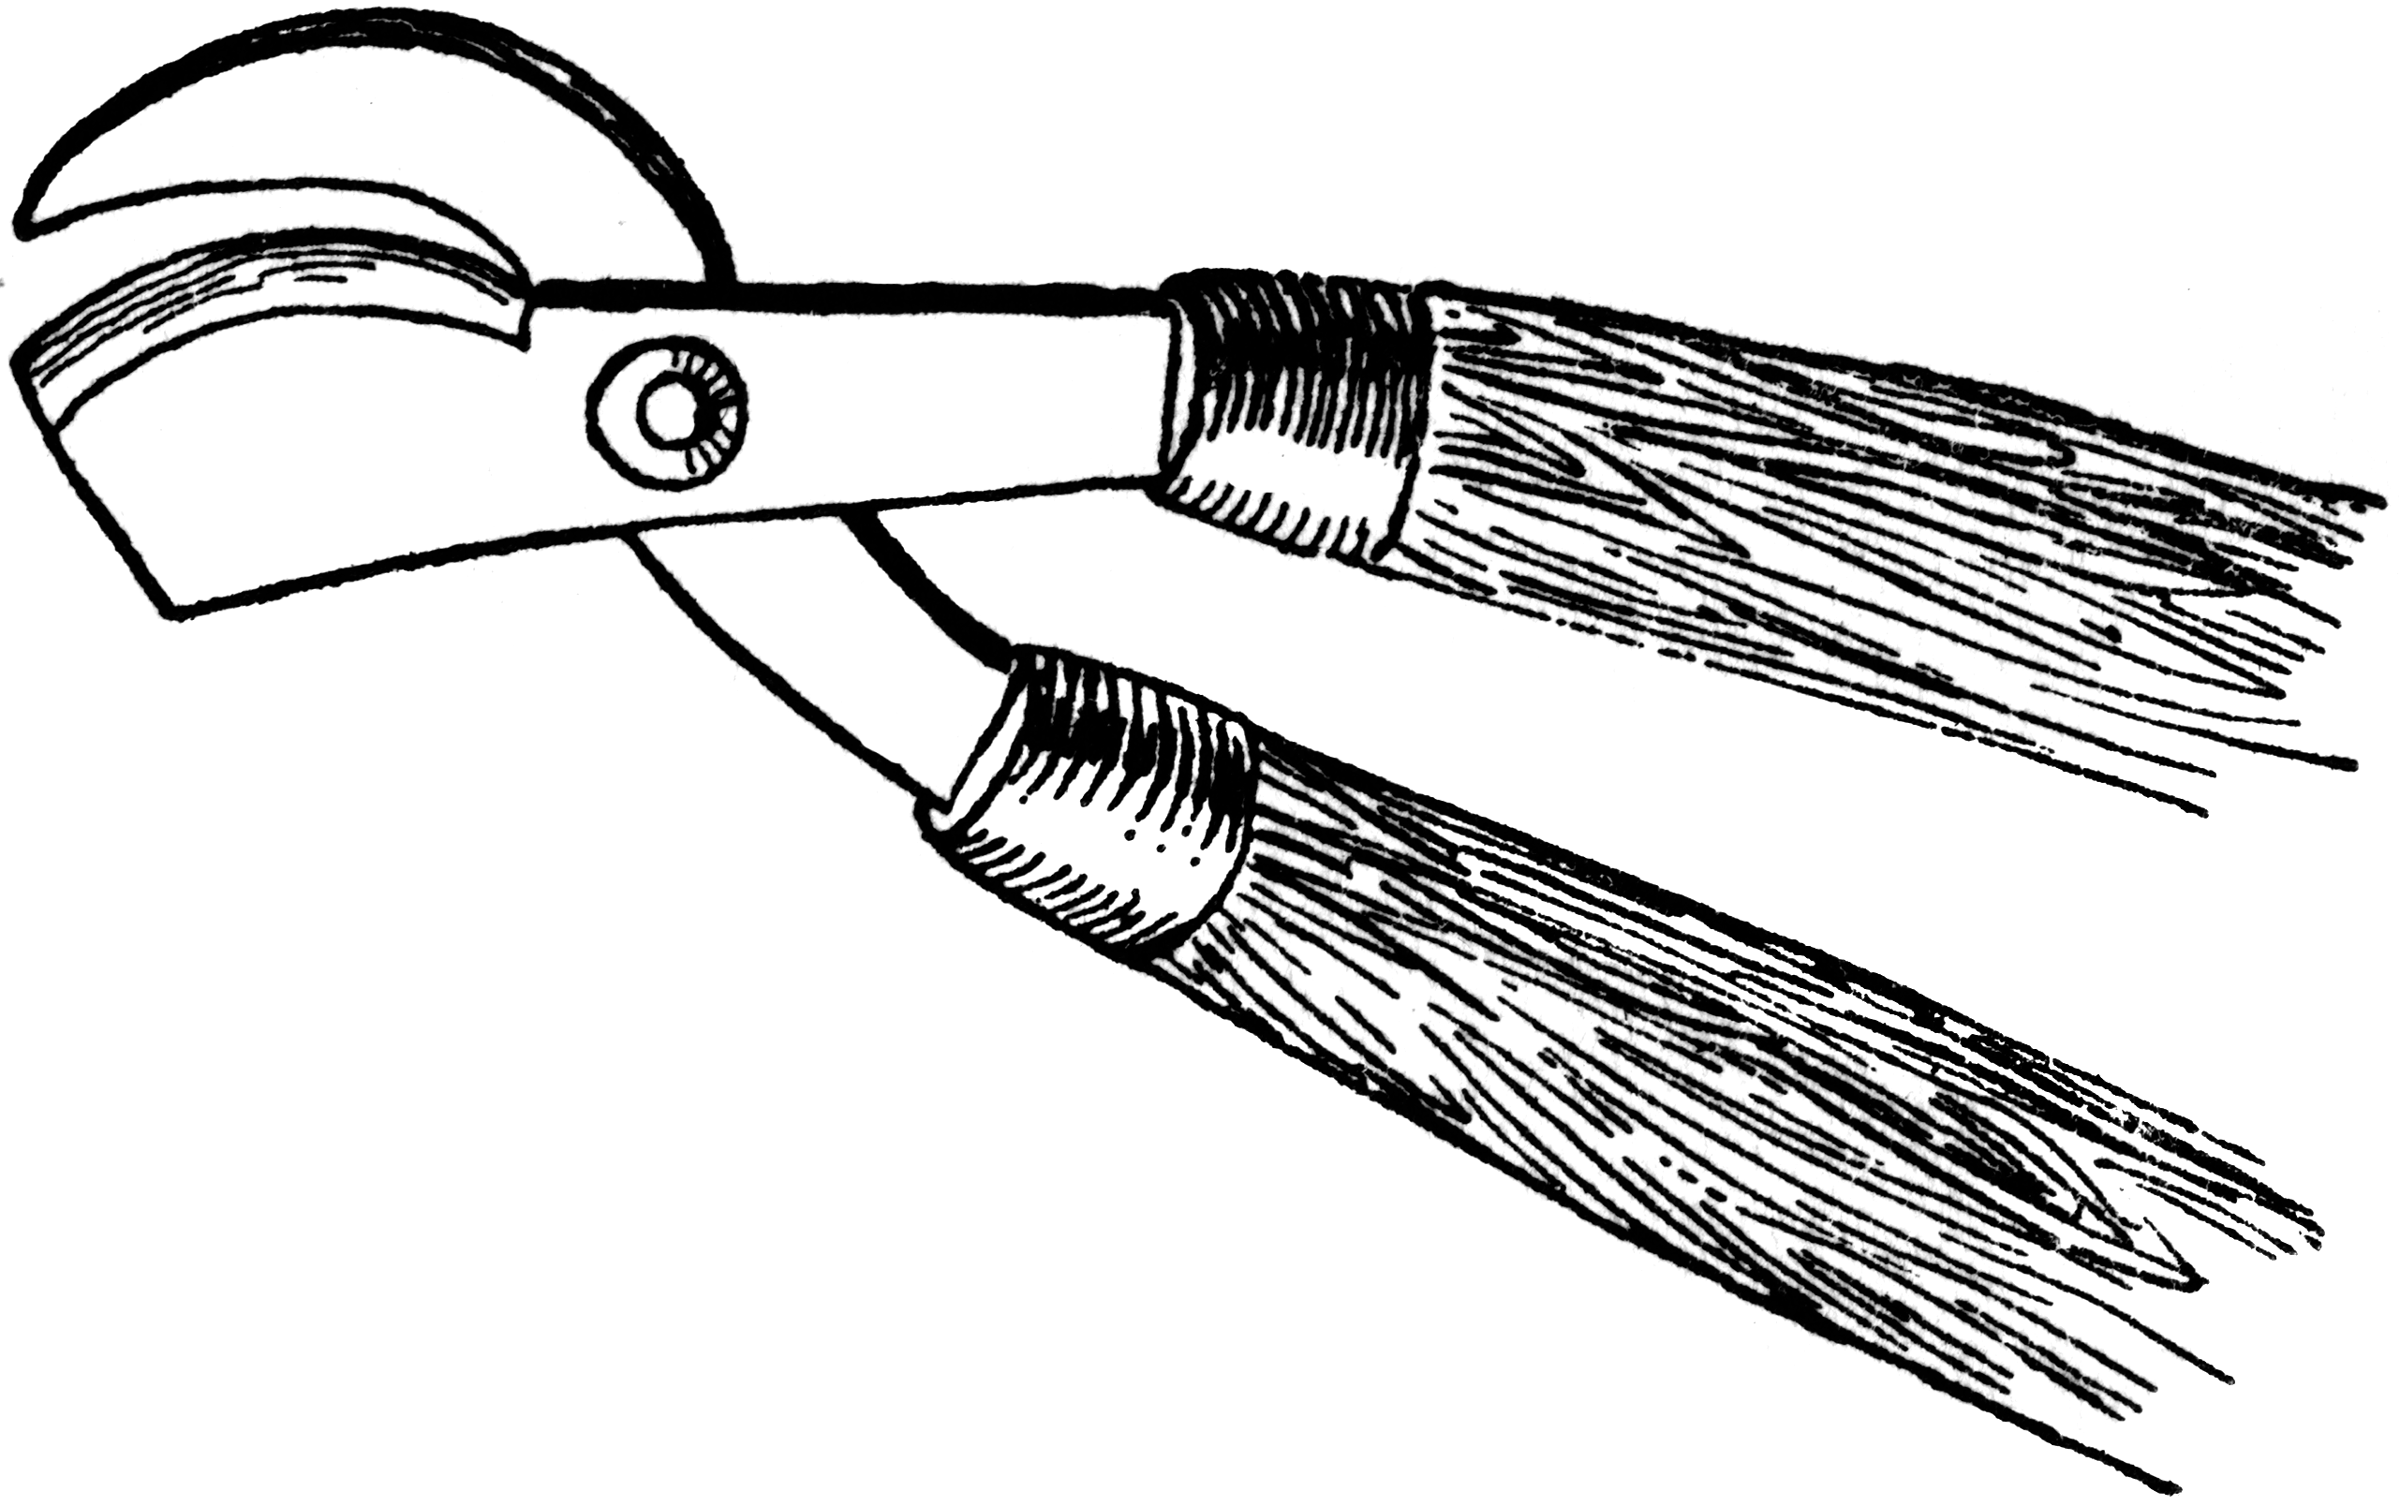 Pruning Shears   Clipart Etc